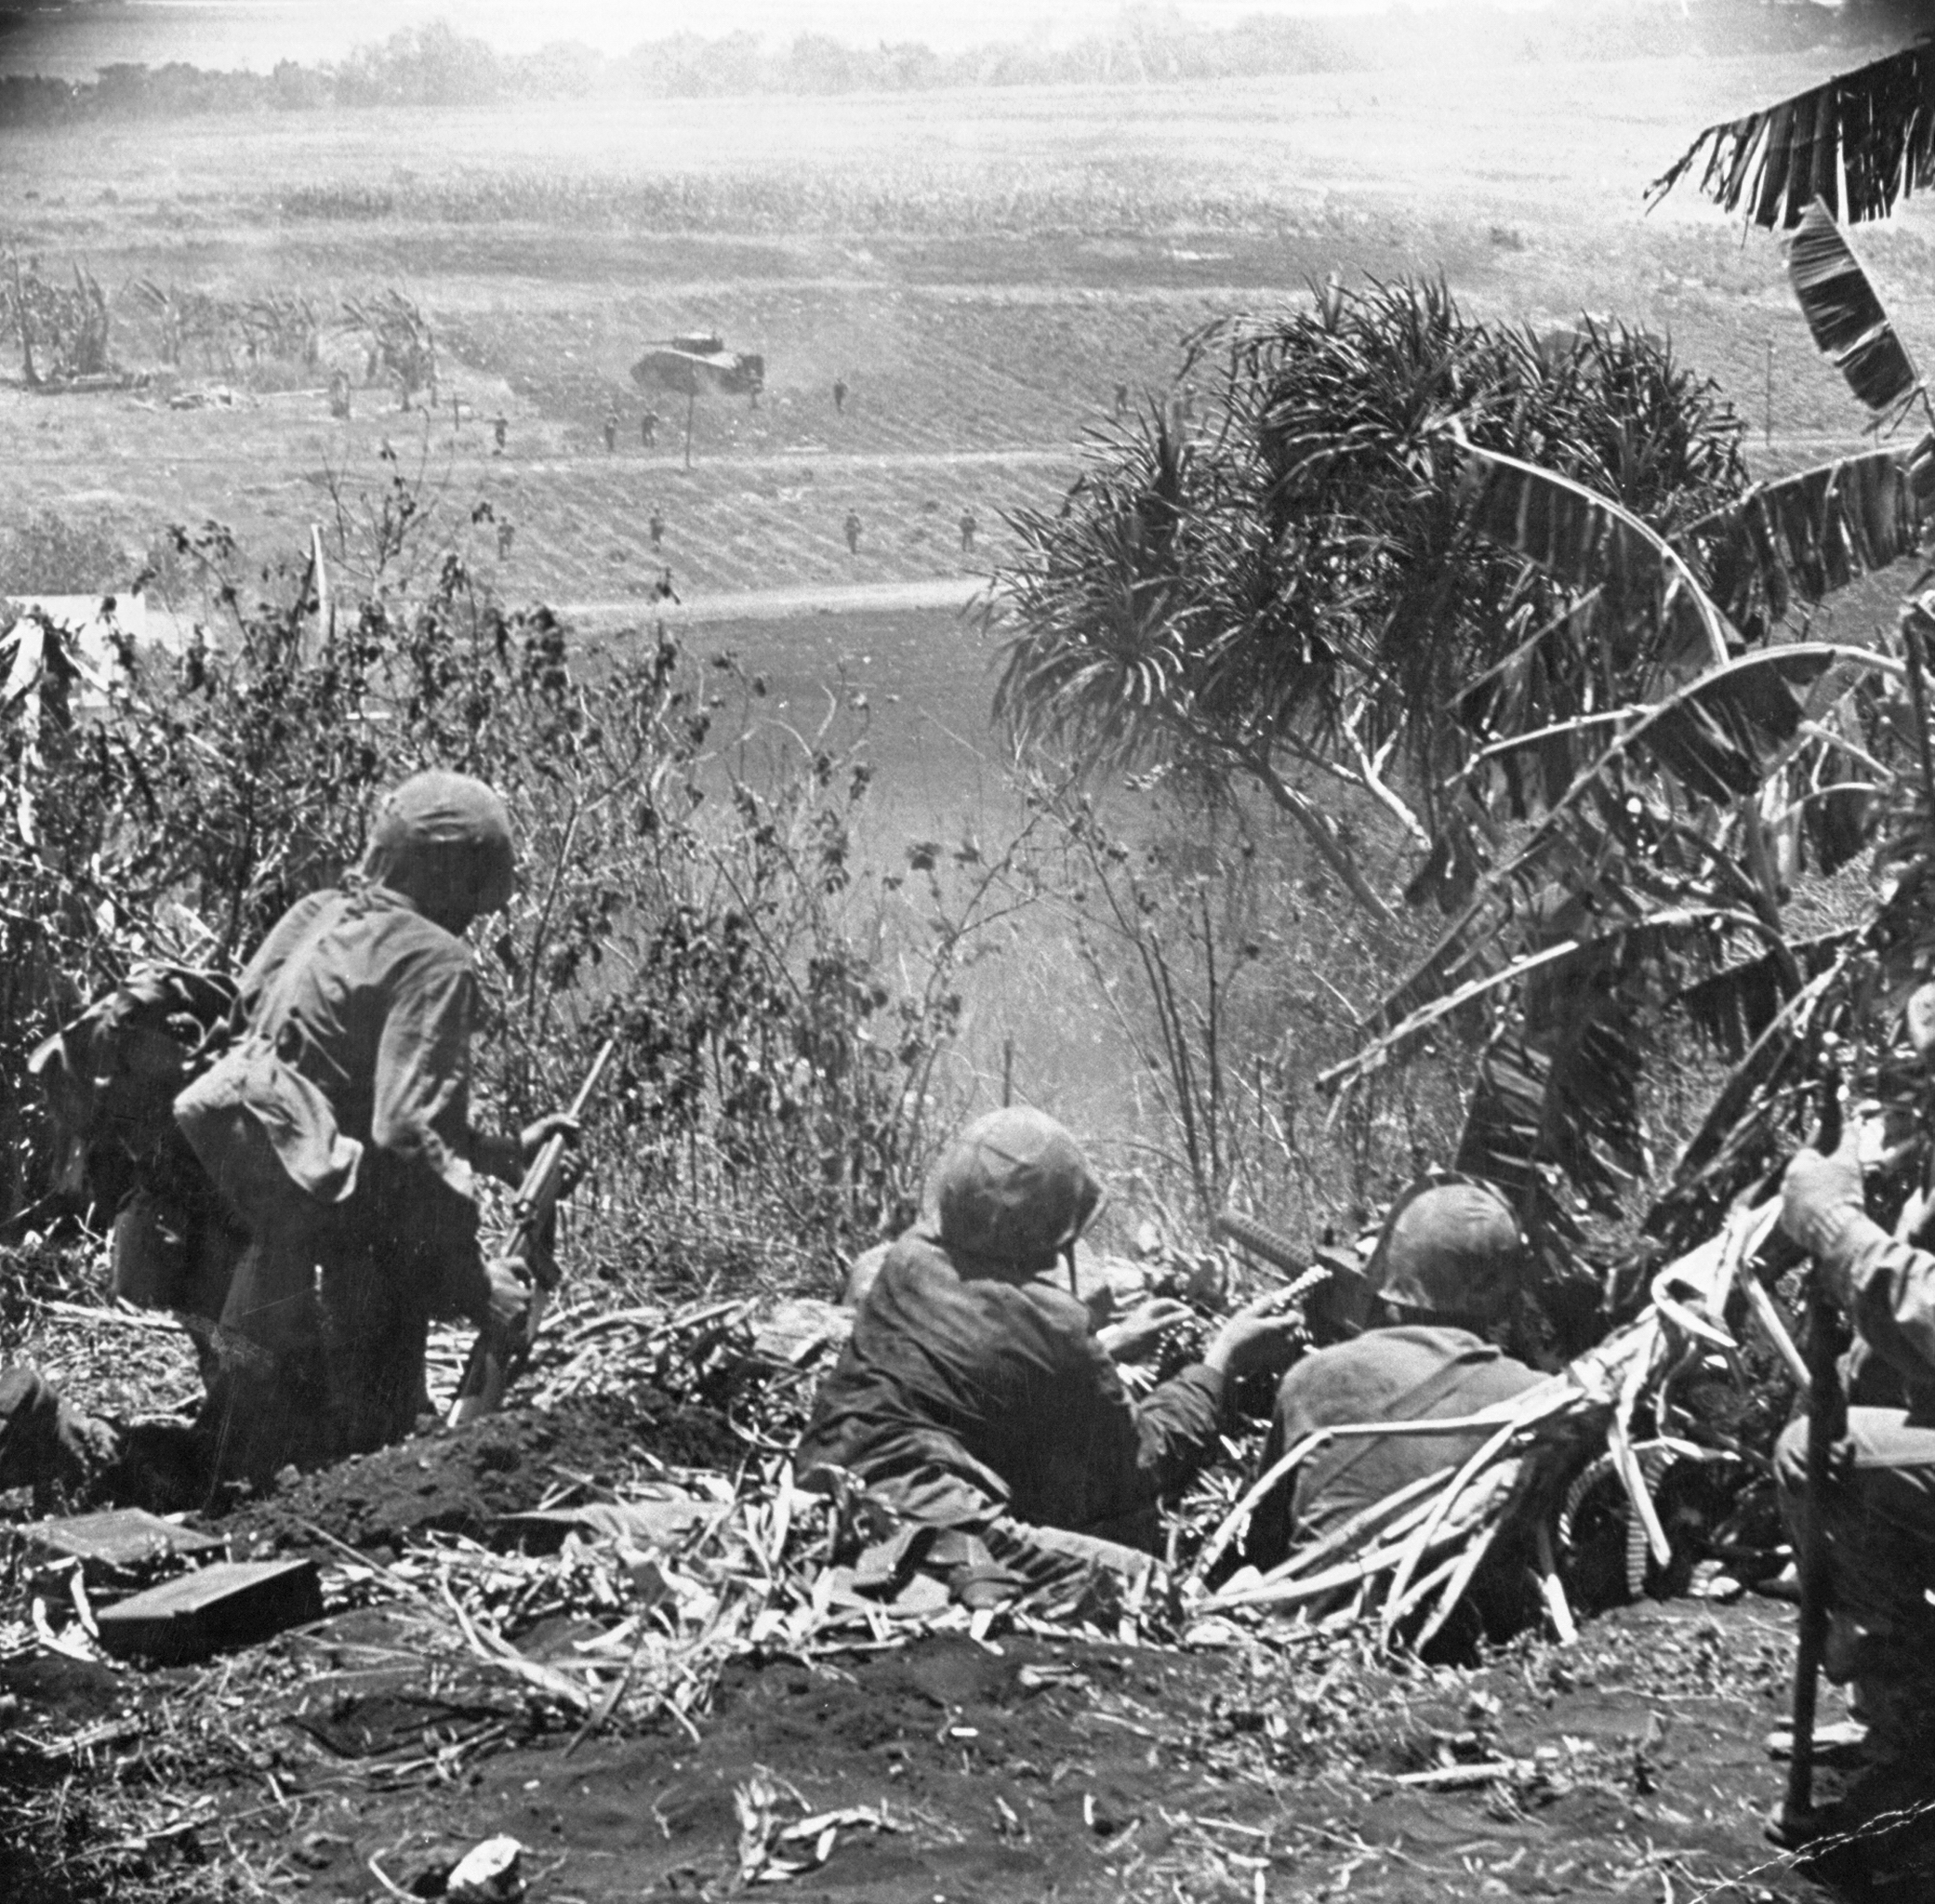 American Marines in action during the fight for control of Saipan, summer 1944.